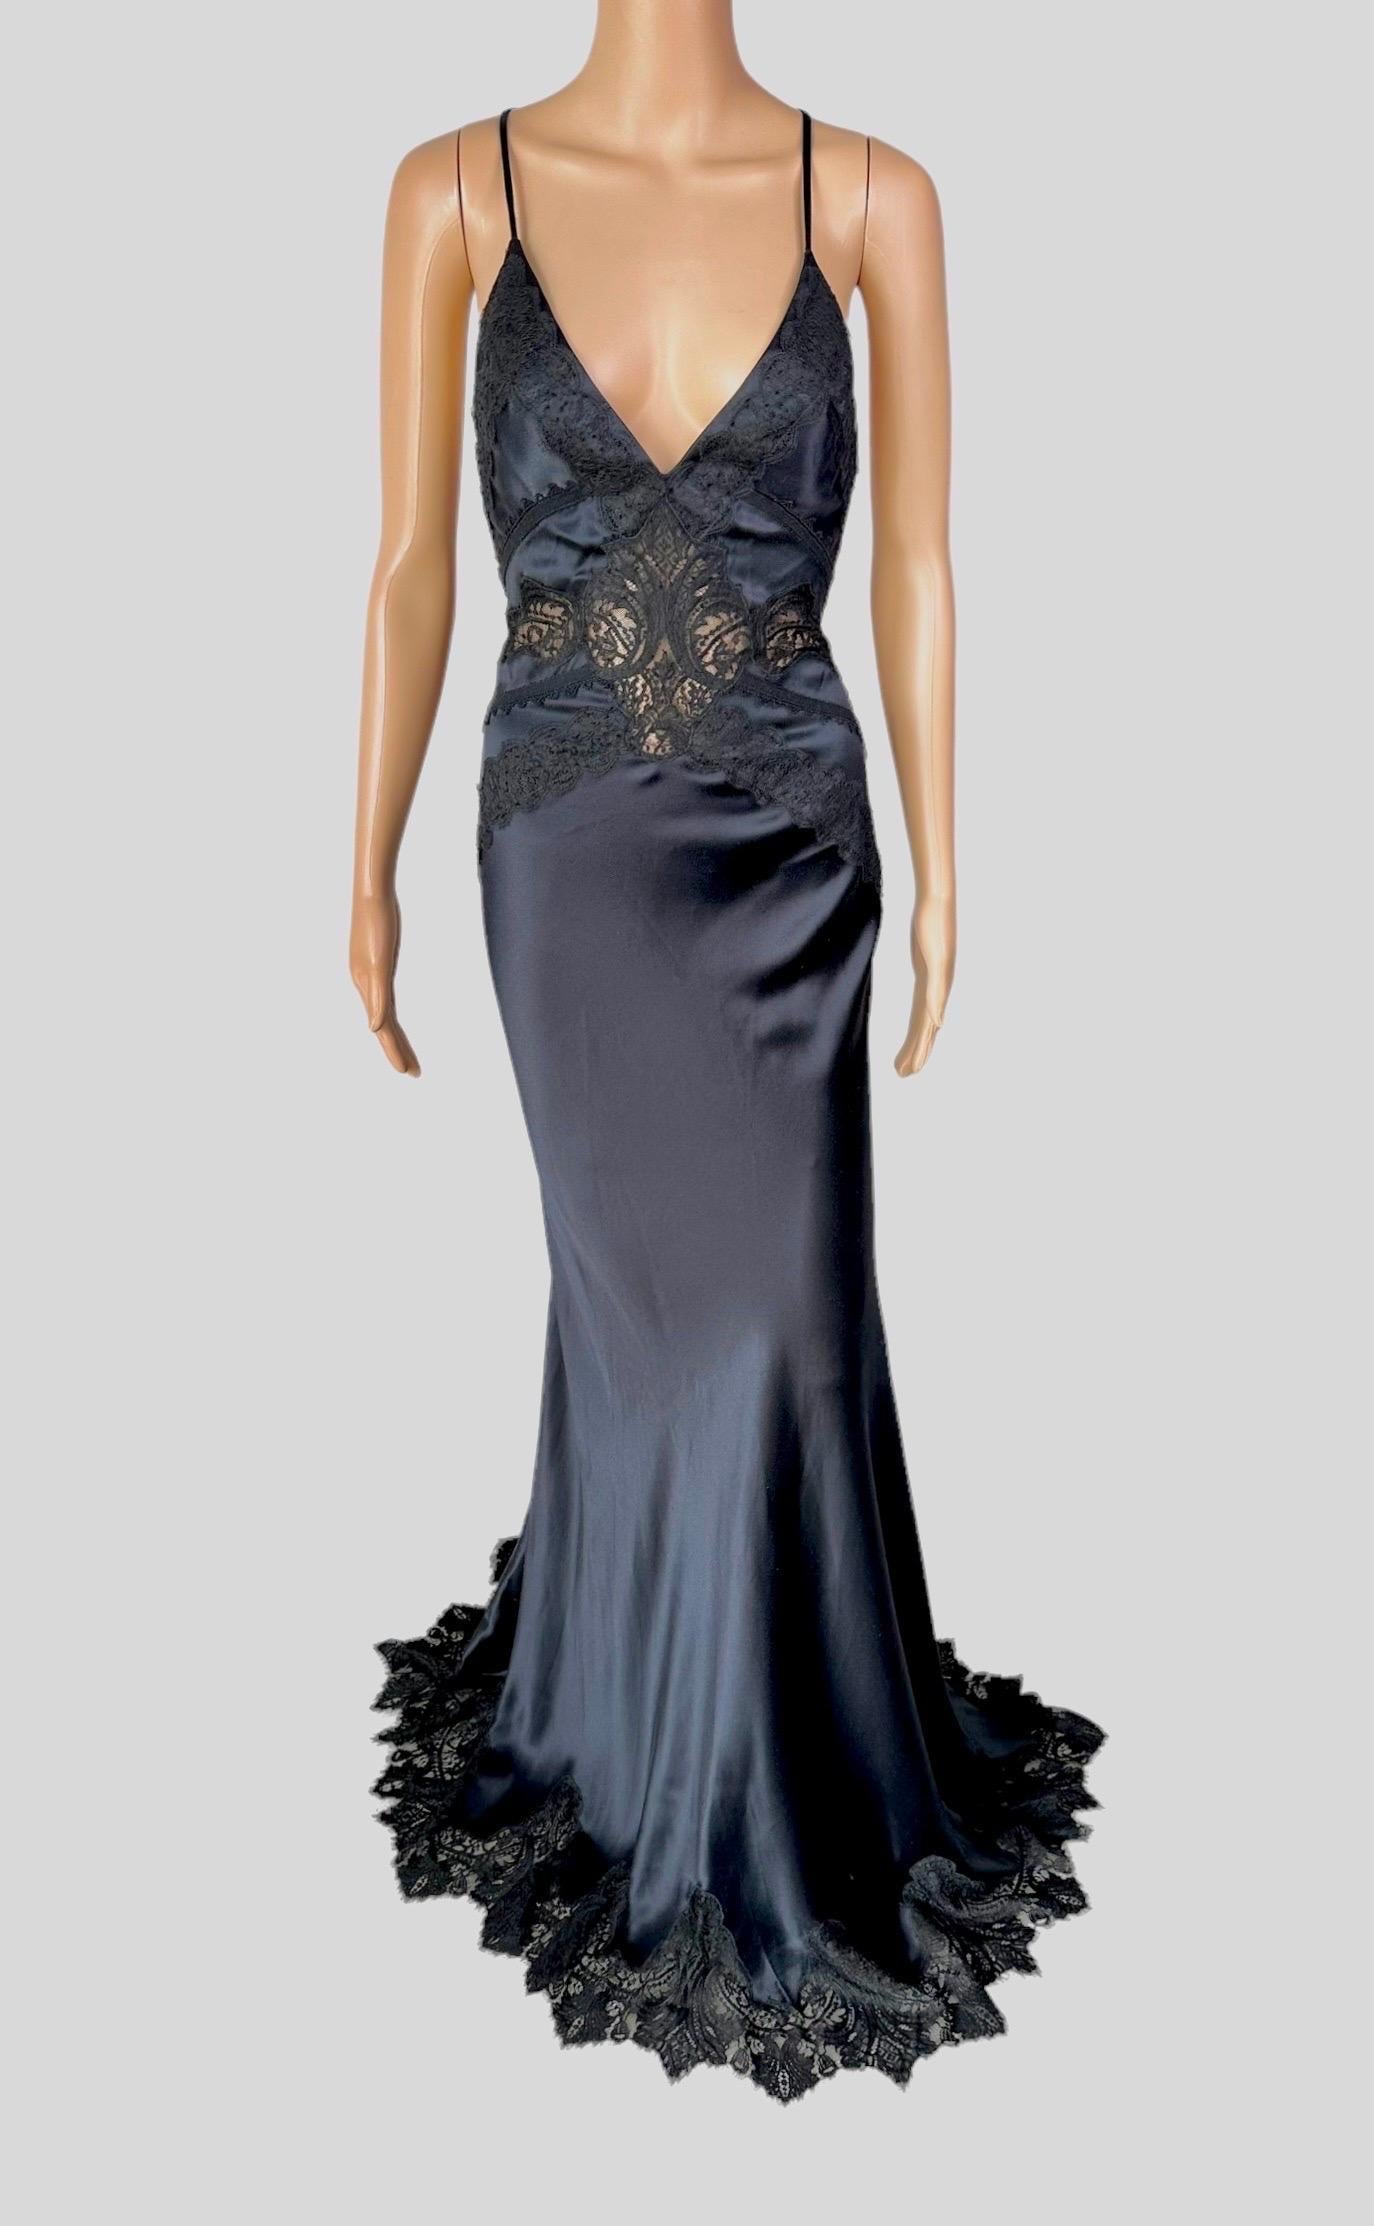 Versace c.2006 Plunging Neckline Sheer Lace Panels Backless Evening Dress Gown  For Sale 1